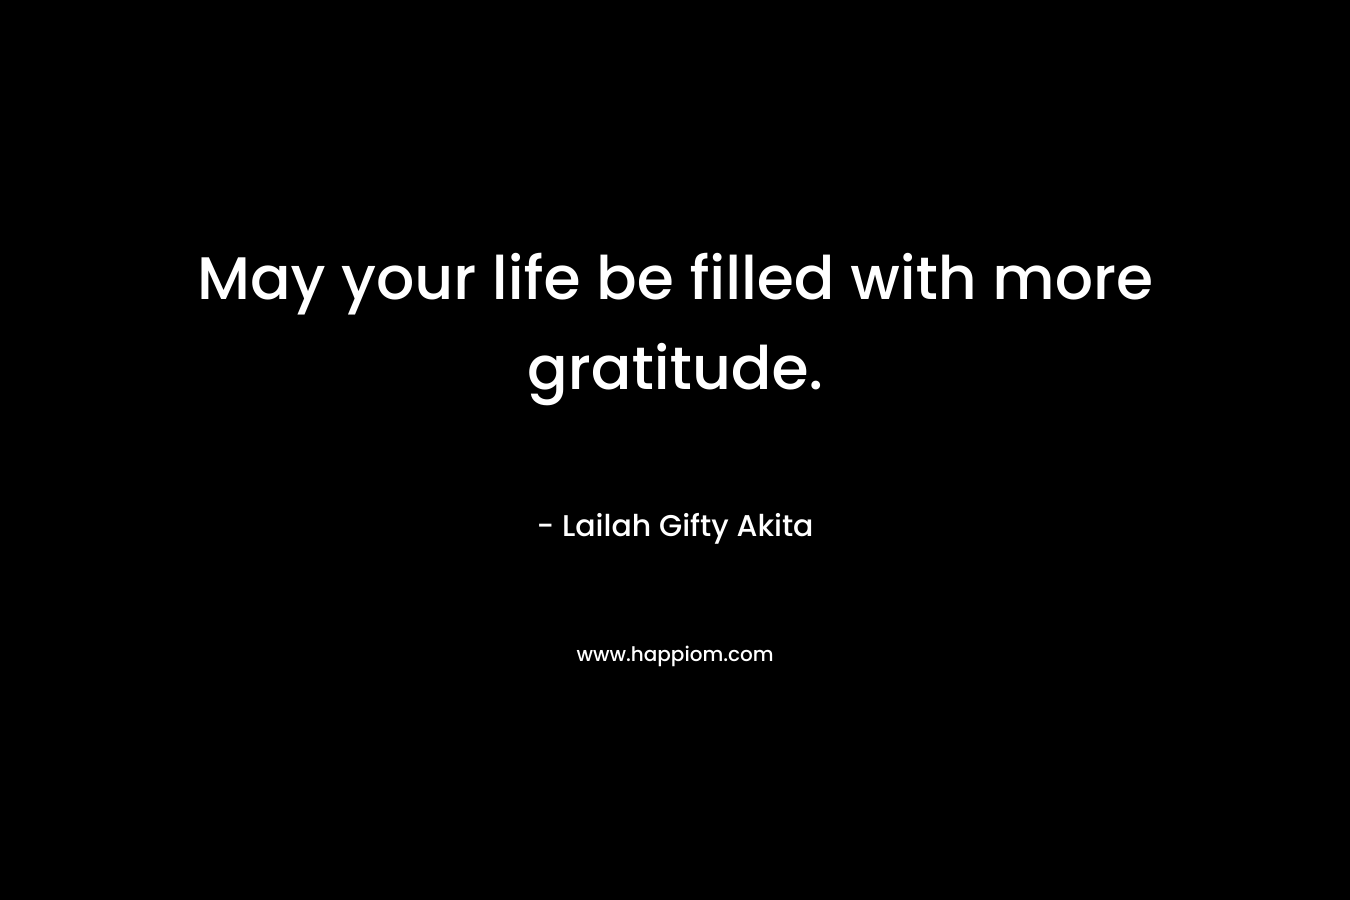 May your life be filled with more gratitude.